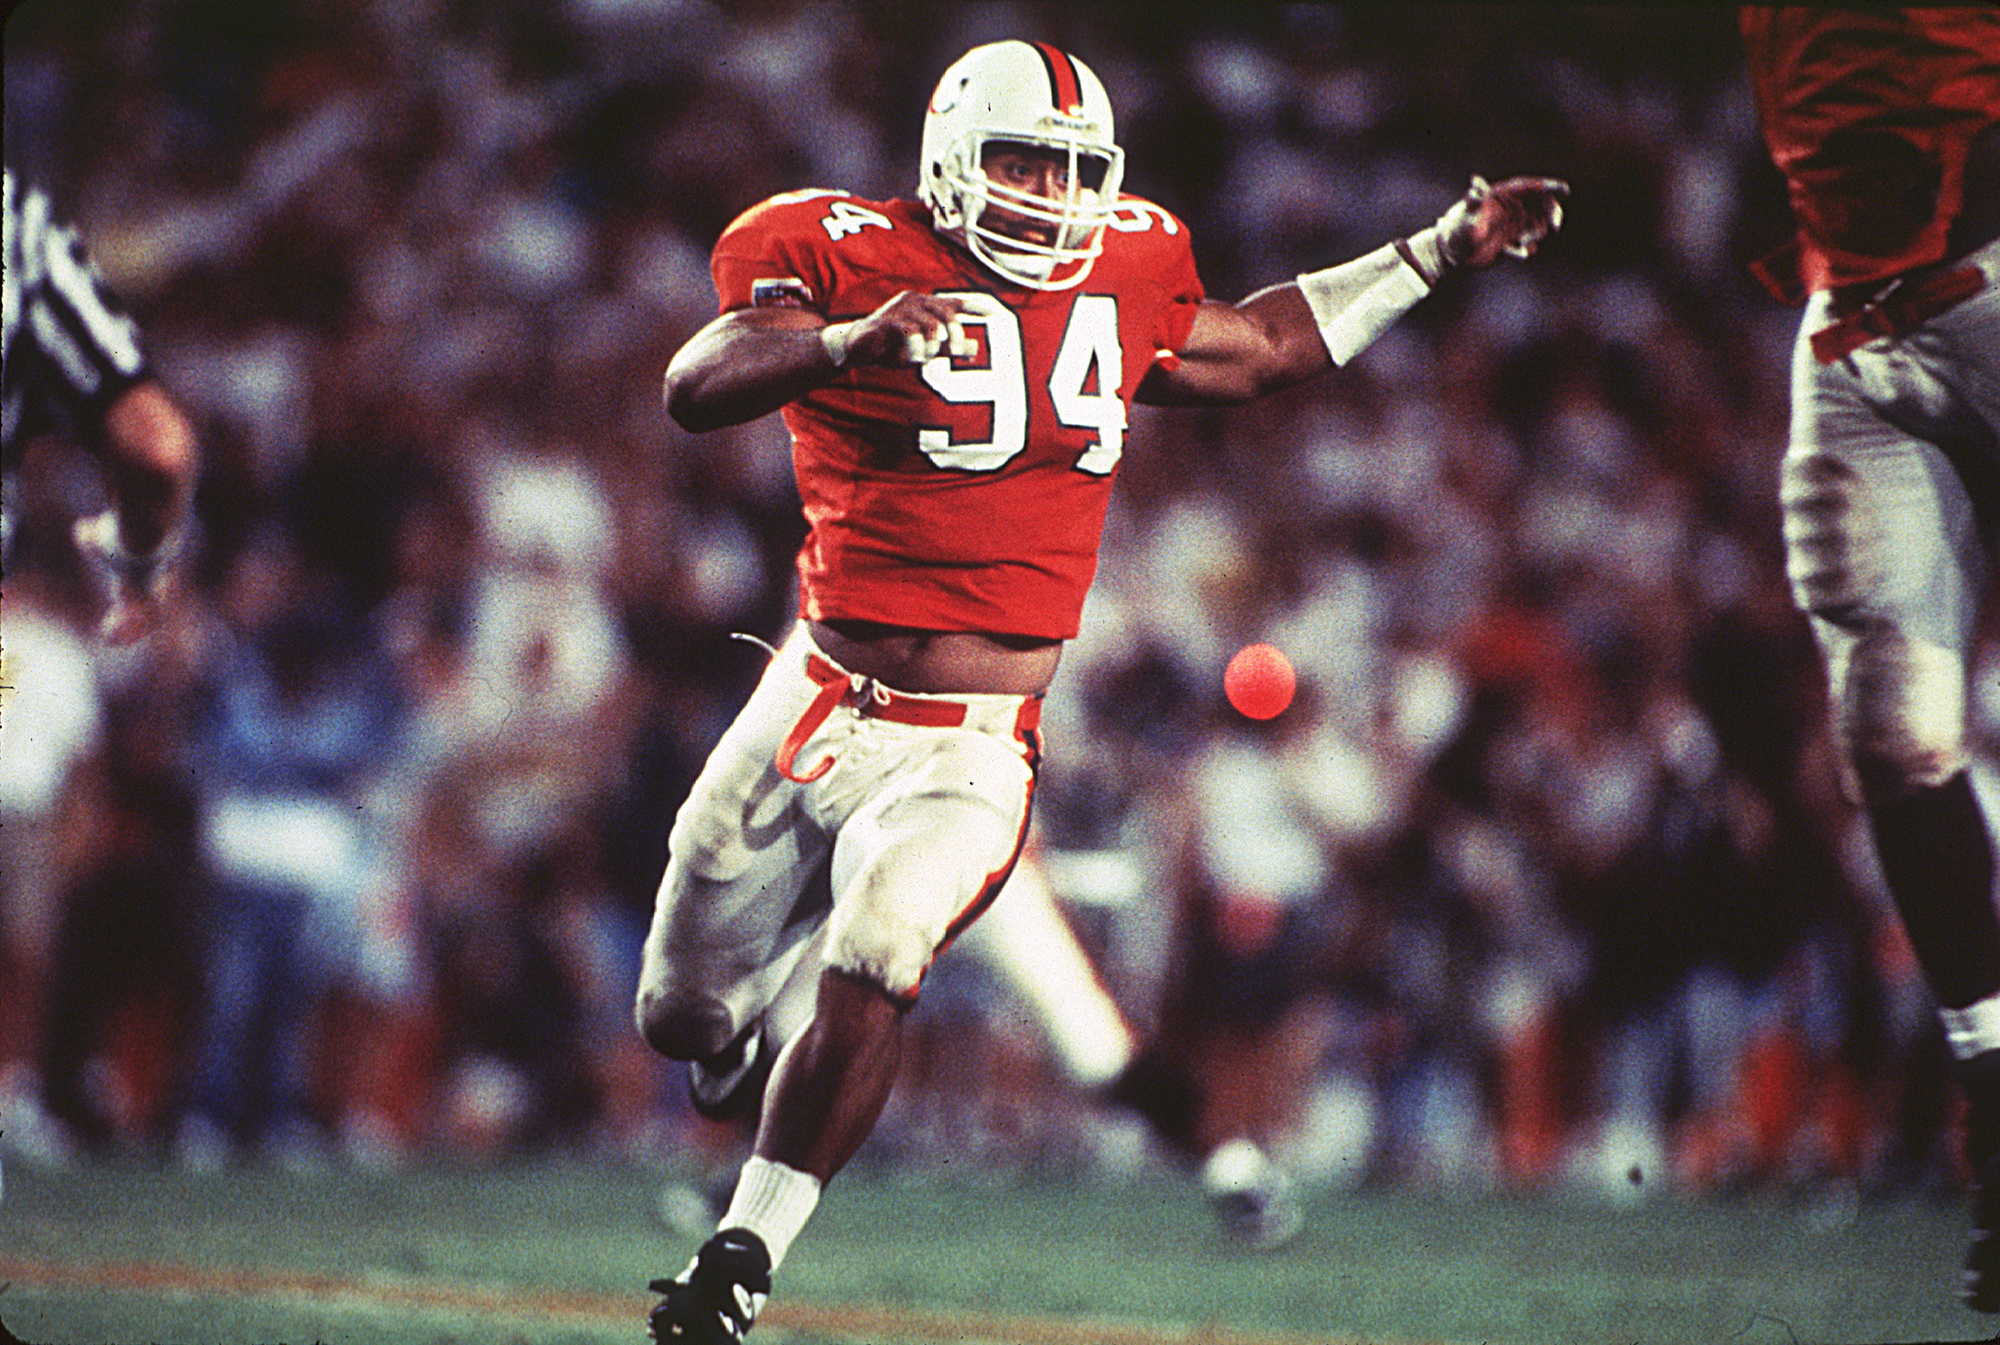 Dwayne Johnson, with the University of Miami Hurricanes in 1992. The college football star won a national championship with the team in 1991.